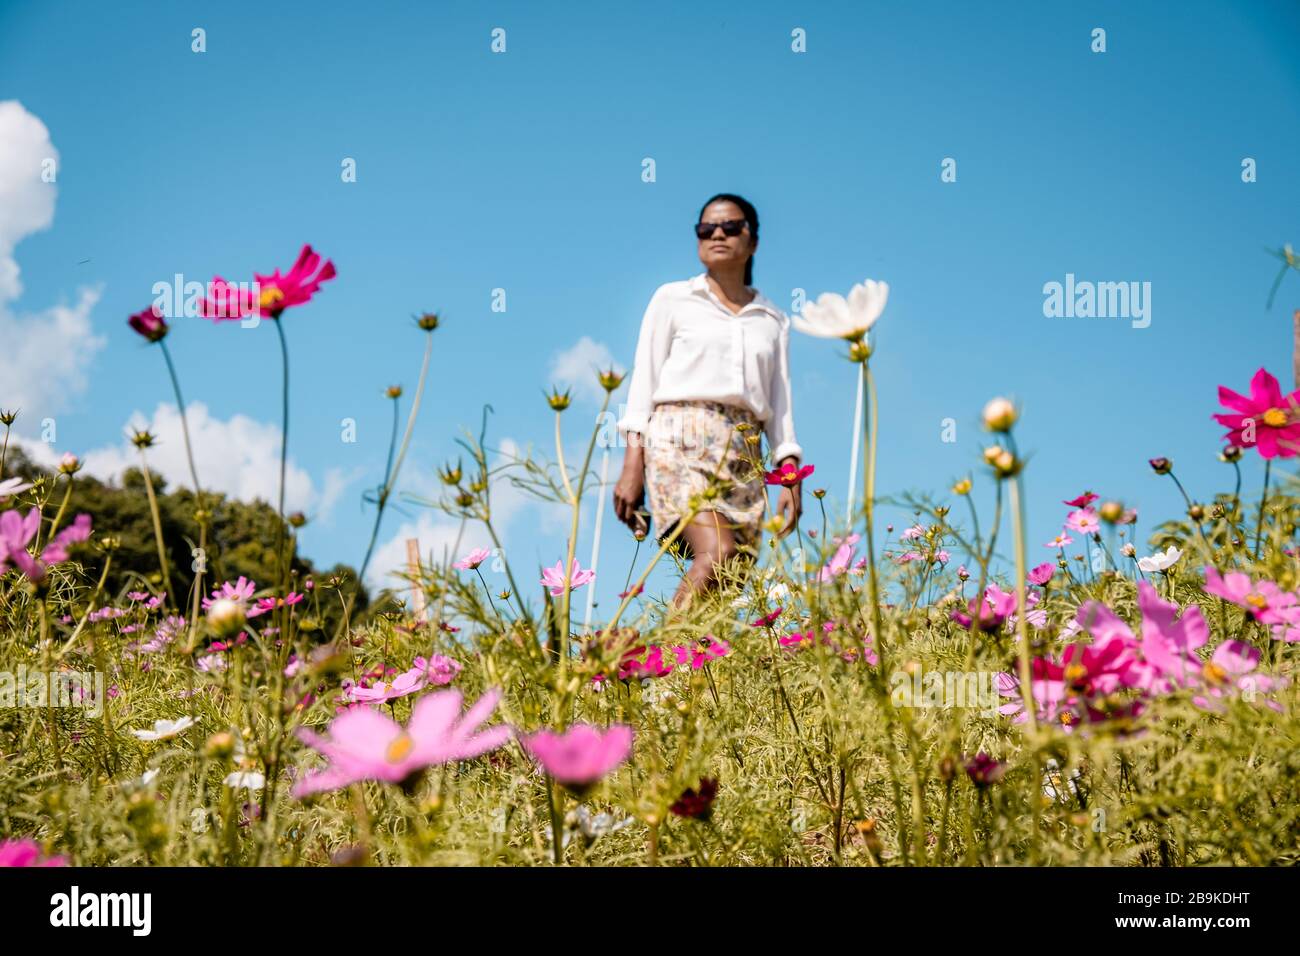 Mon Jam young woman at the mountains of Mon Cham Chiang Mai Thailand, fresh look of flowers outdoor woman spring view Stock Photo